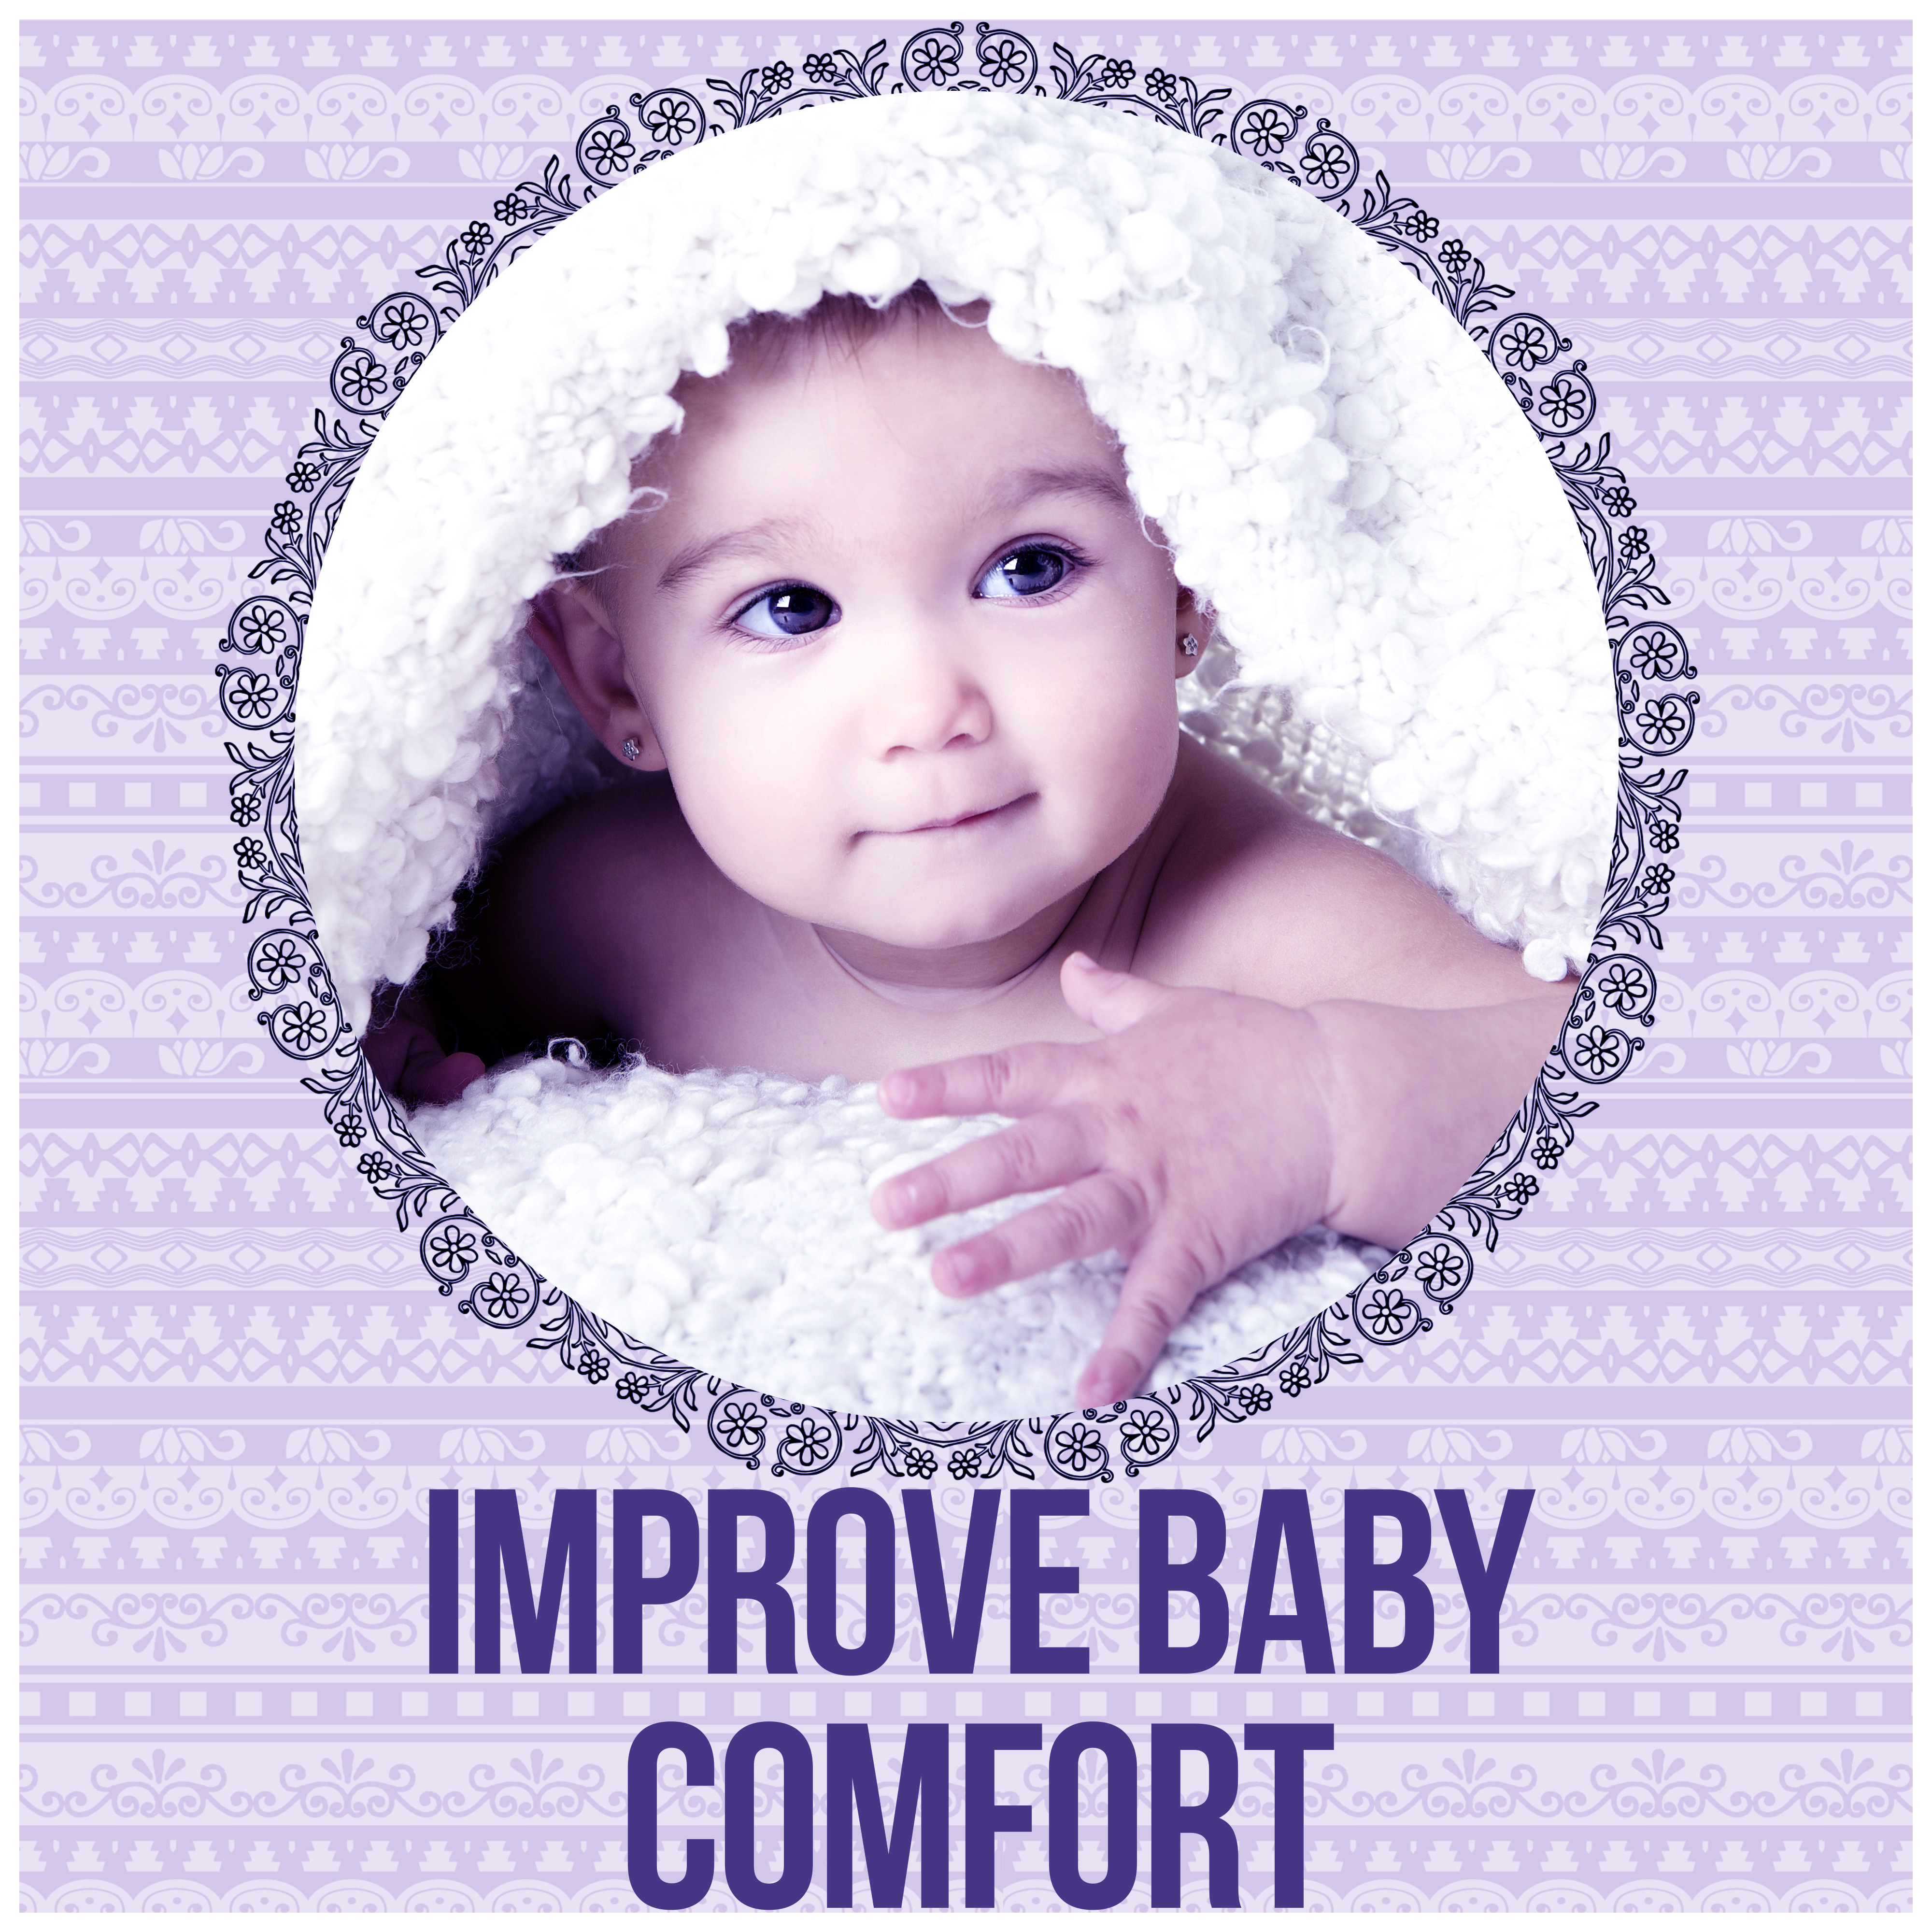 Improve Baby Comfort - Ideas to Calm Baby, Let Your Baby Sleep, Teach Yourself Doing Gentle Massage, Back to Basics